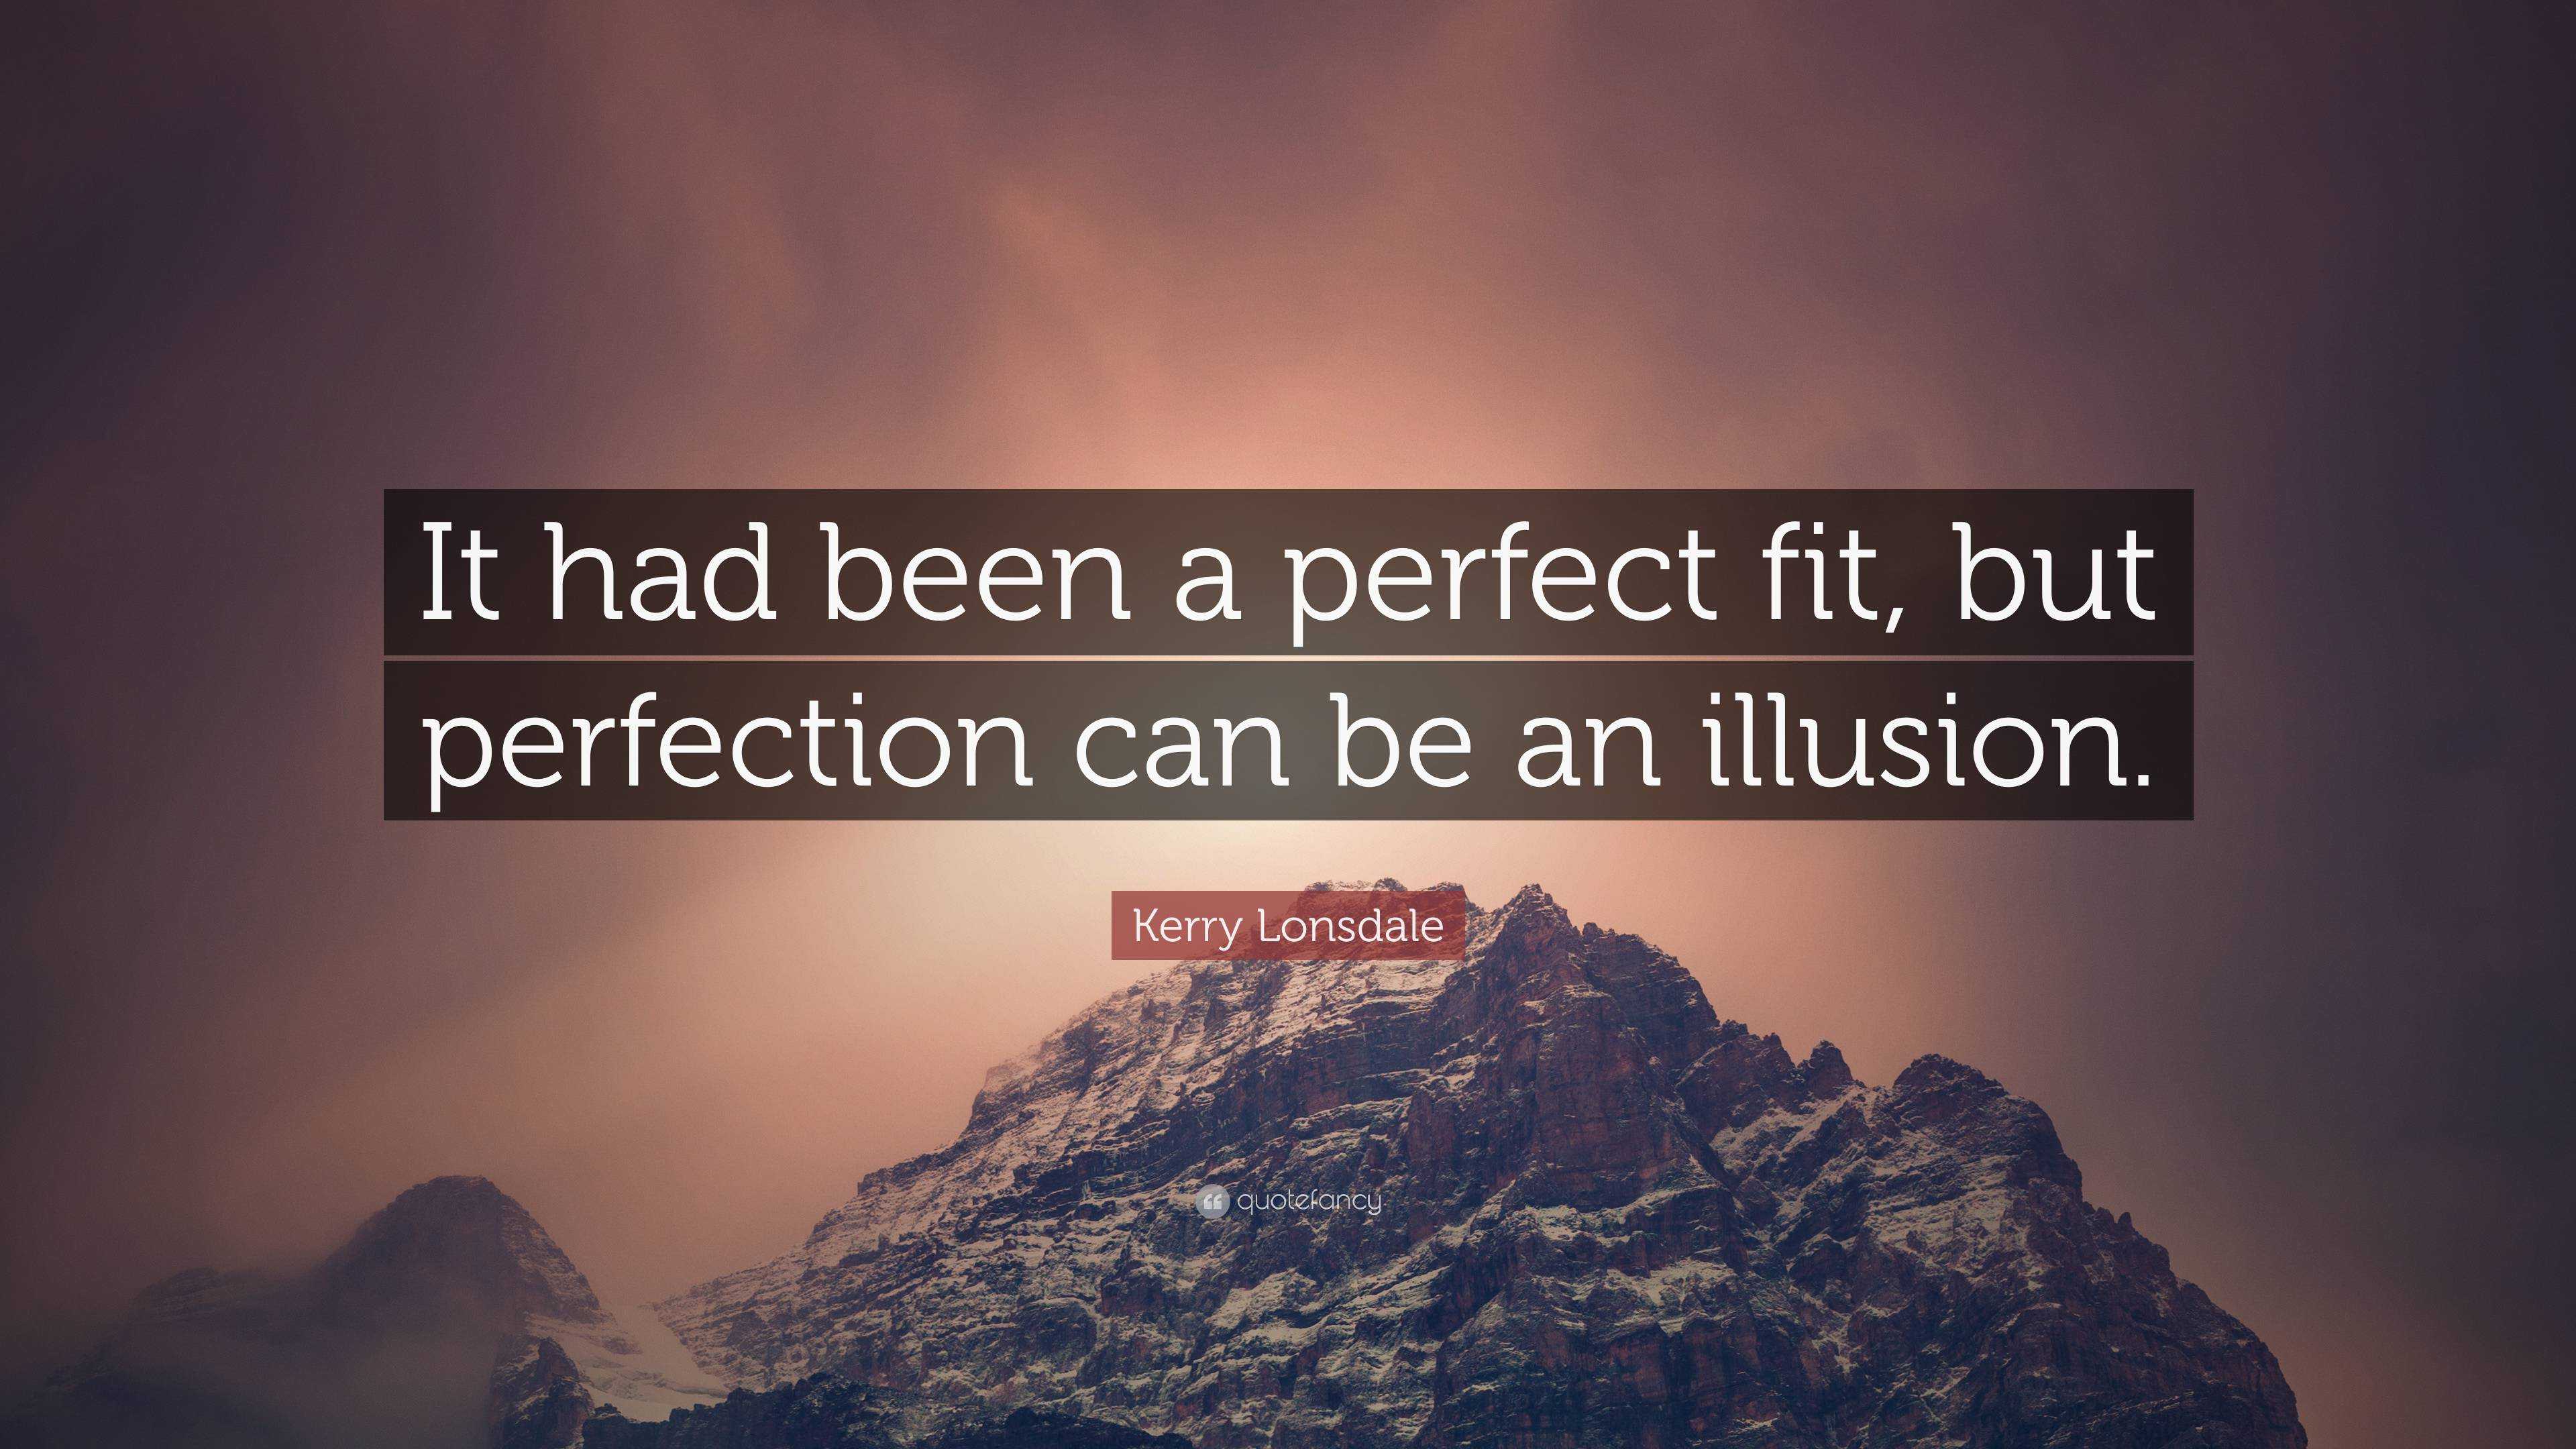 Kerry Lonsdale Quote: “It had been a perfect fit, but perfection can be ...